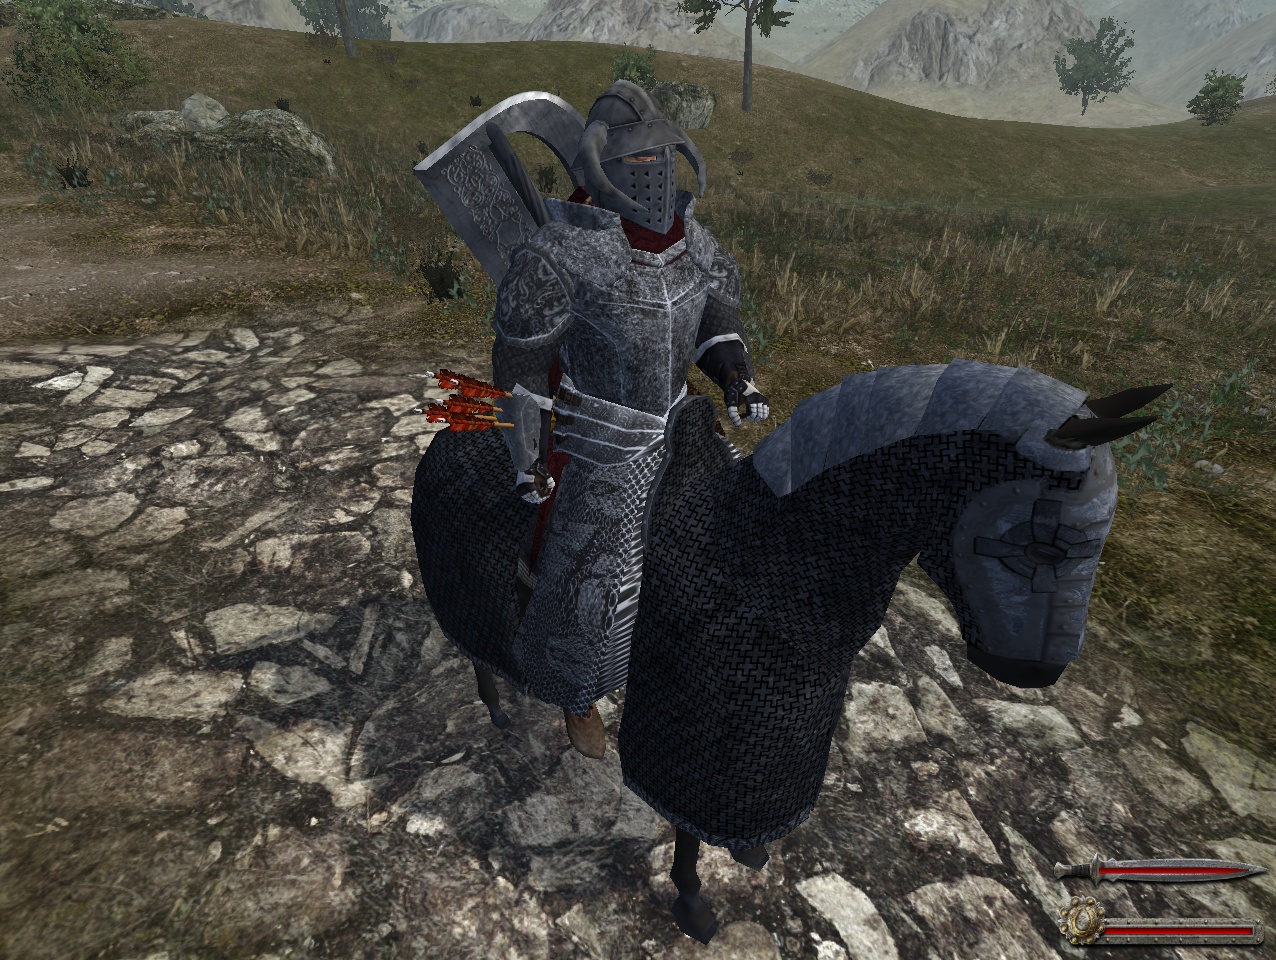 mod db mount and blade warband